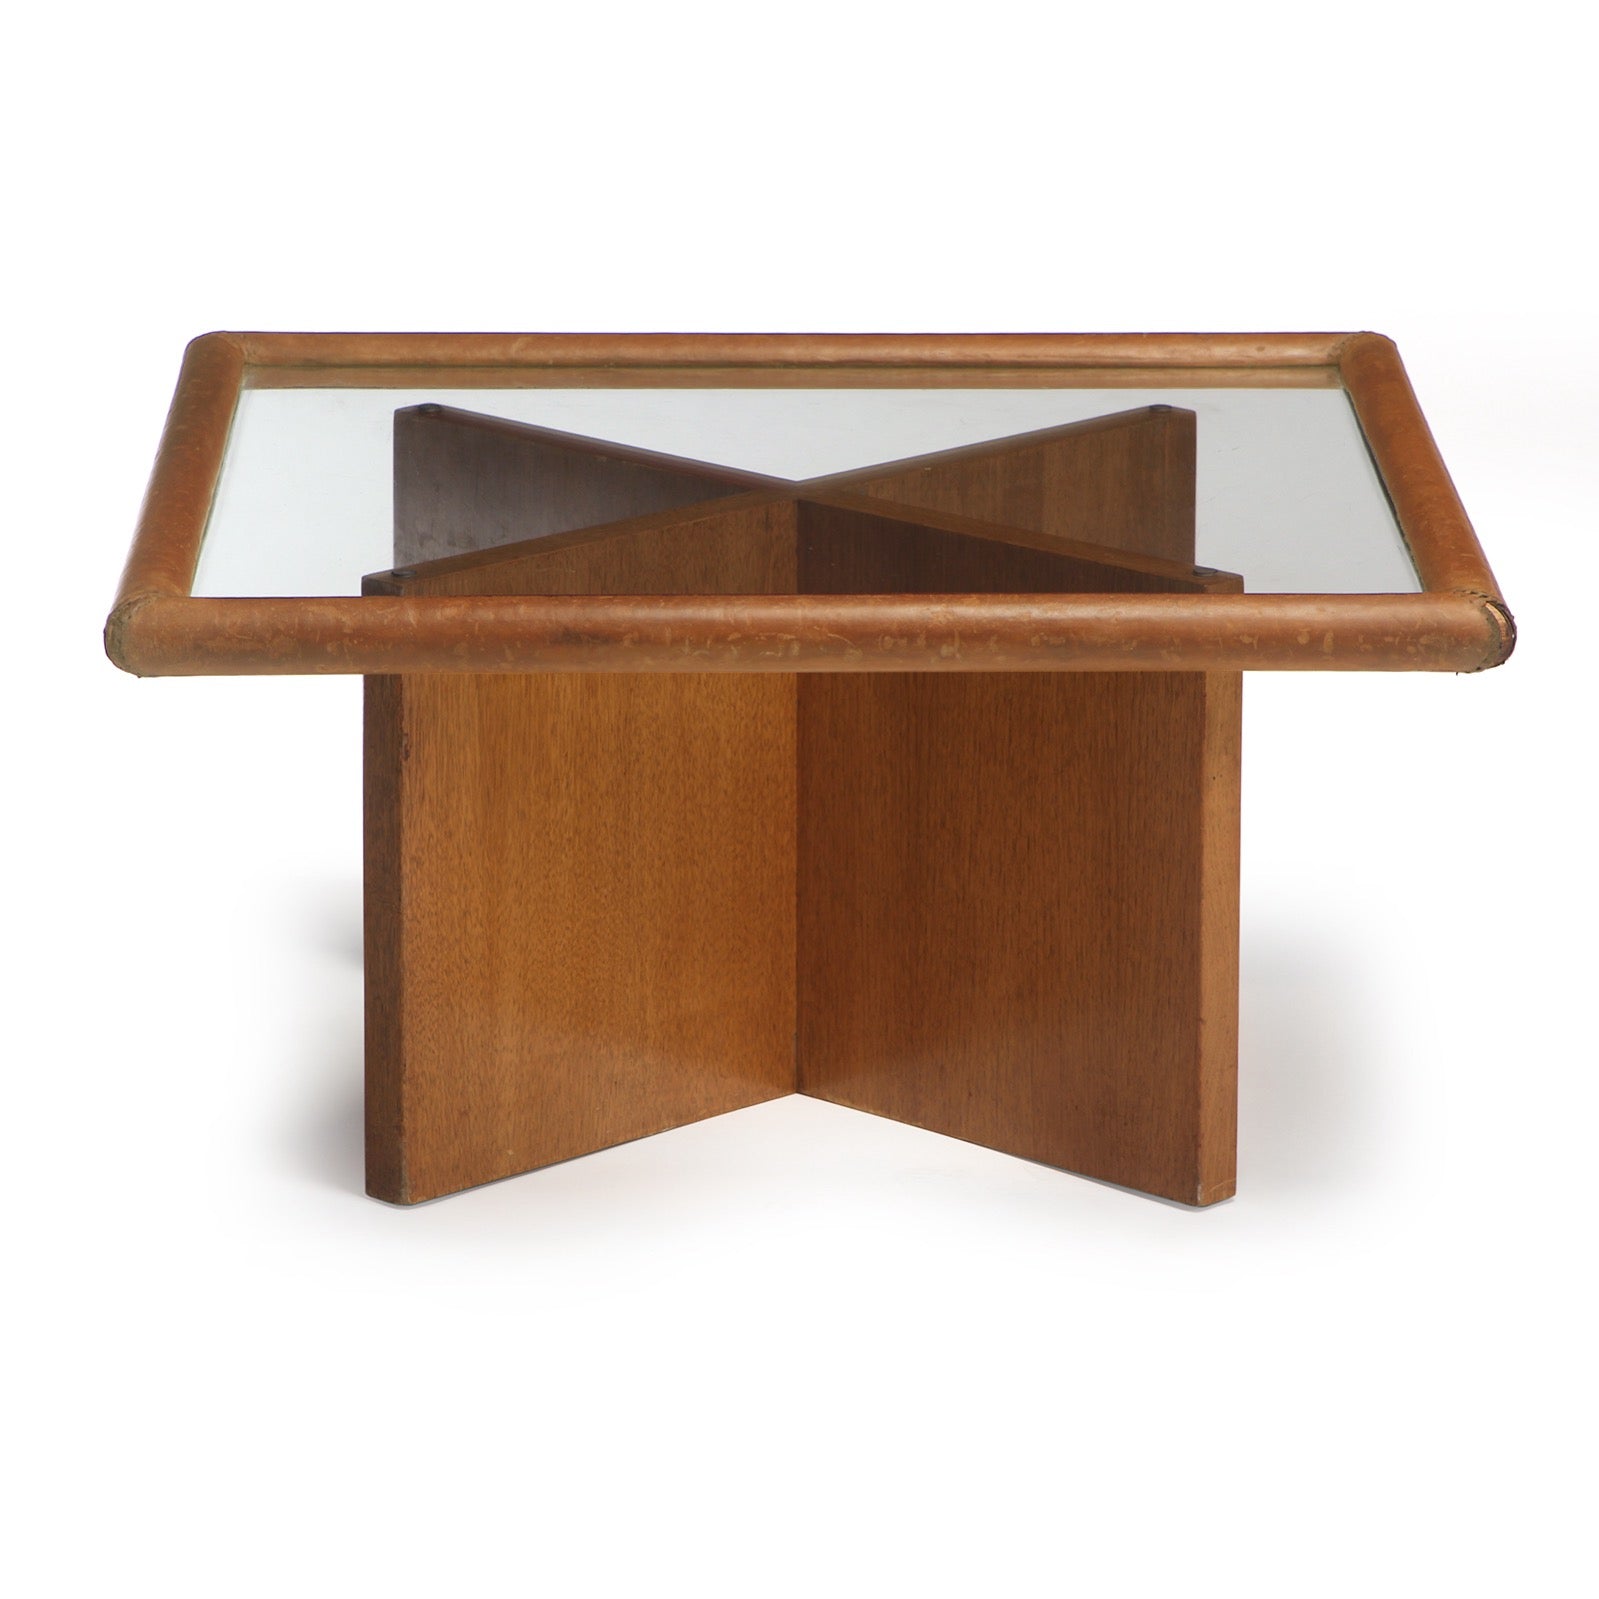 X-Base Low Table by Edward Wormley for Dunbar